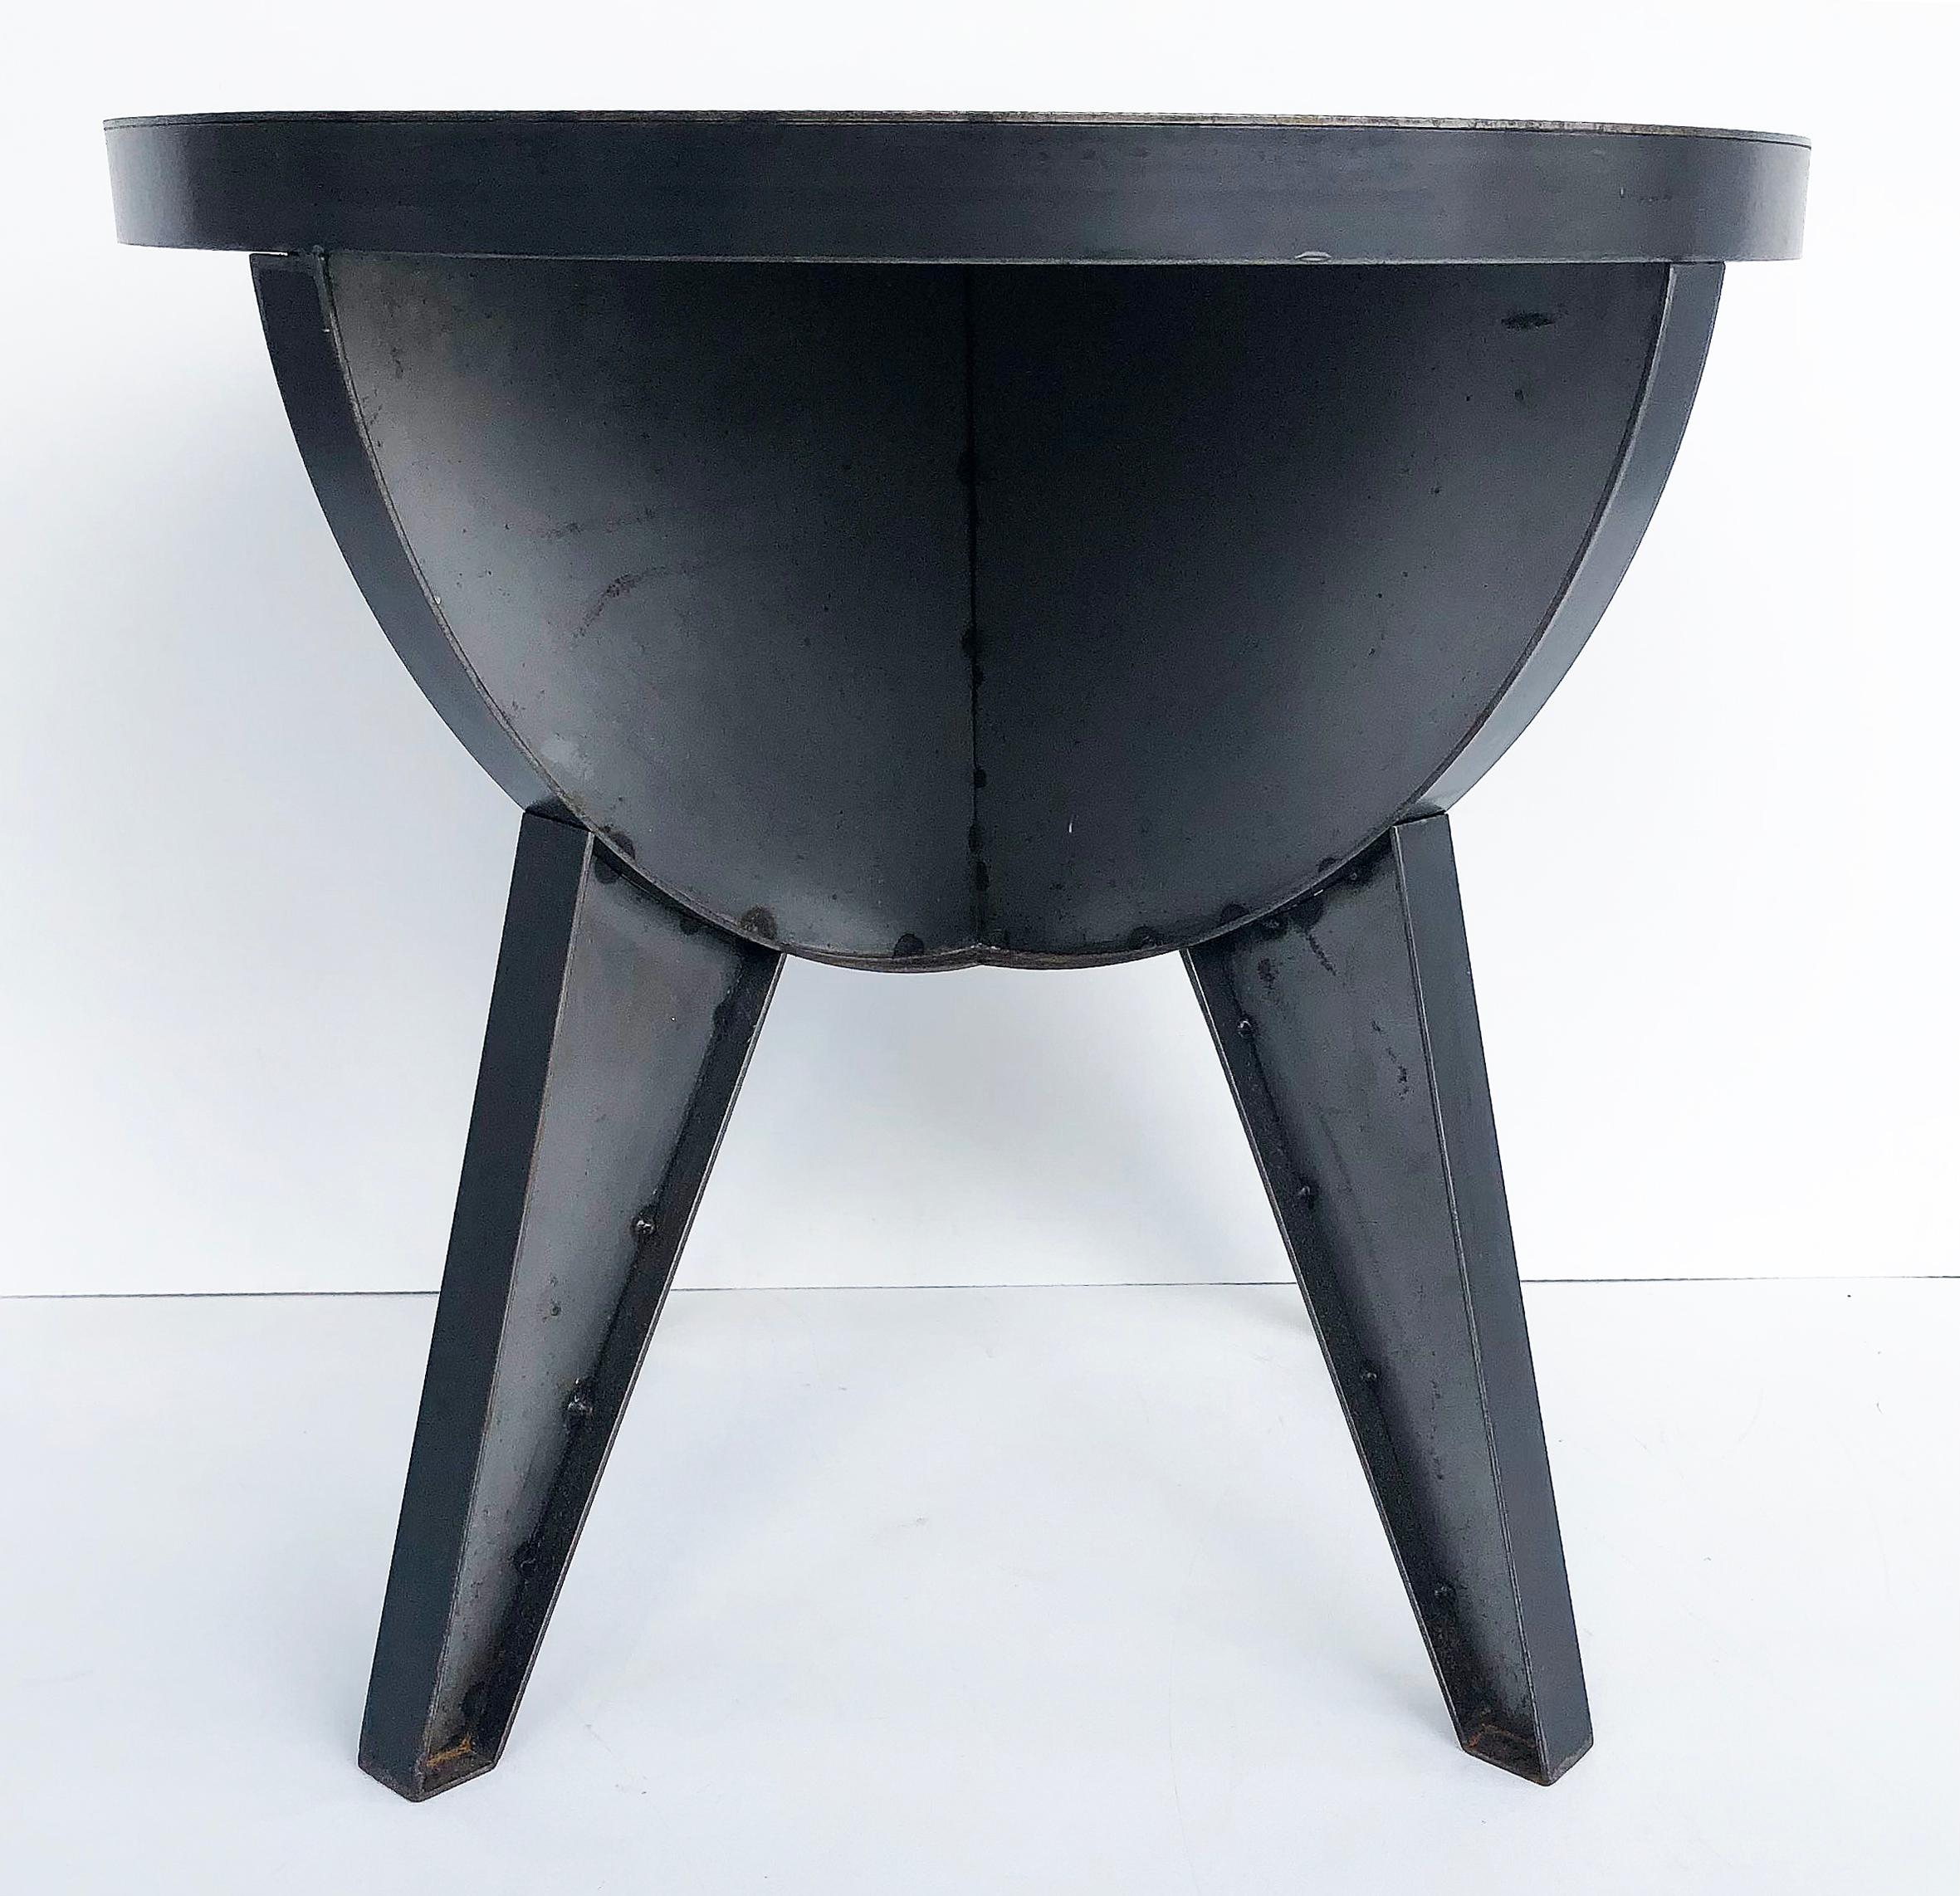 Contemporary Sputnik Studio Industrial Recycled Steel Side Tables by Kevin Shahan